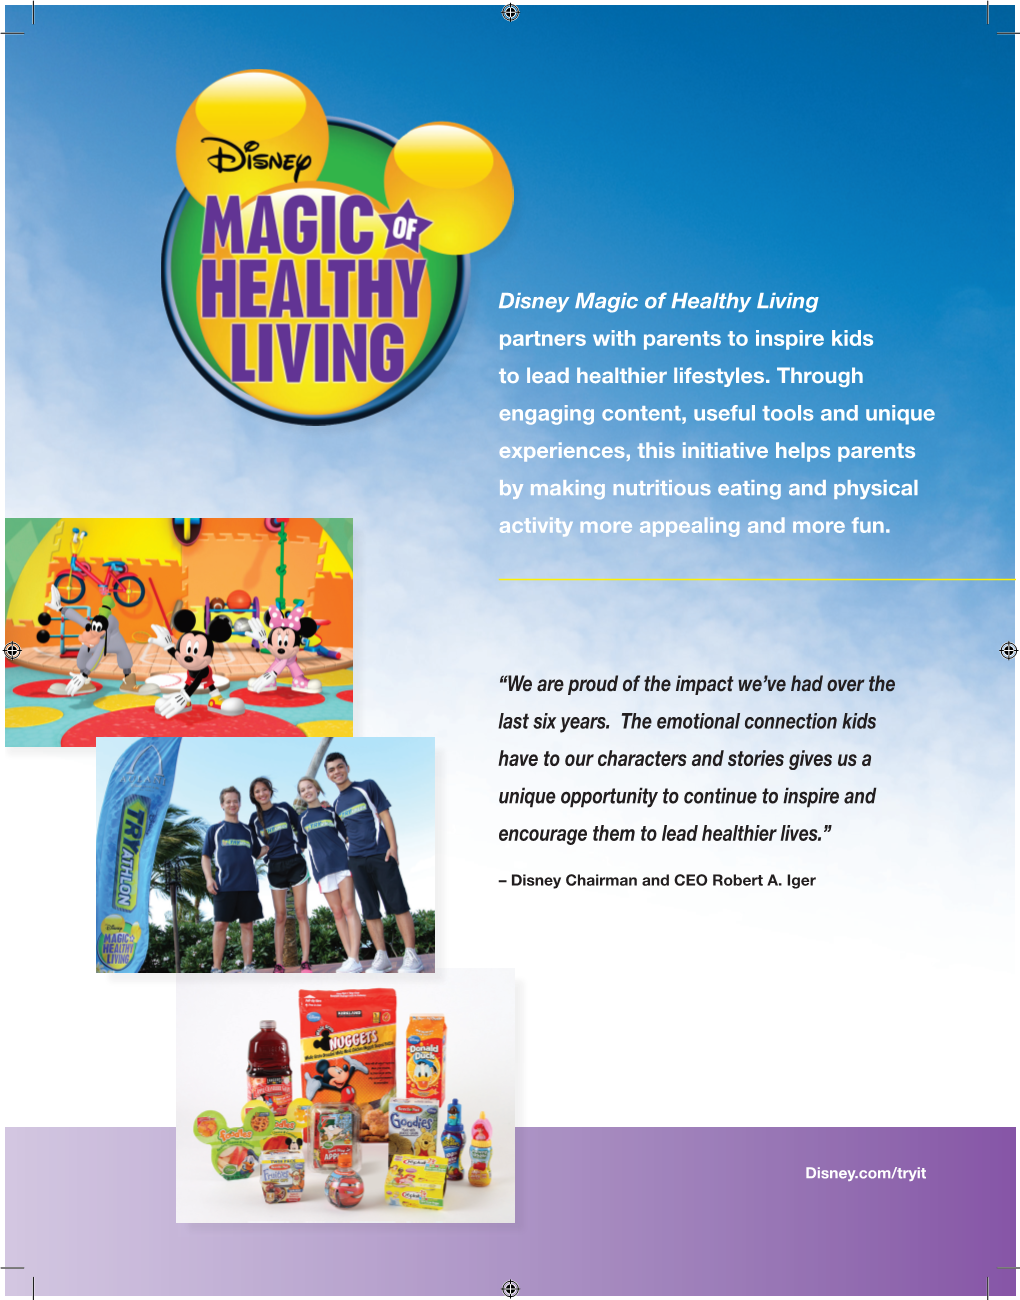 Disney Magic of Healthy Living Partners with Parents to Inspire Kids to Lead Healthier Lifestyles